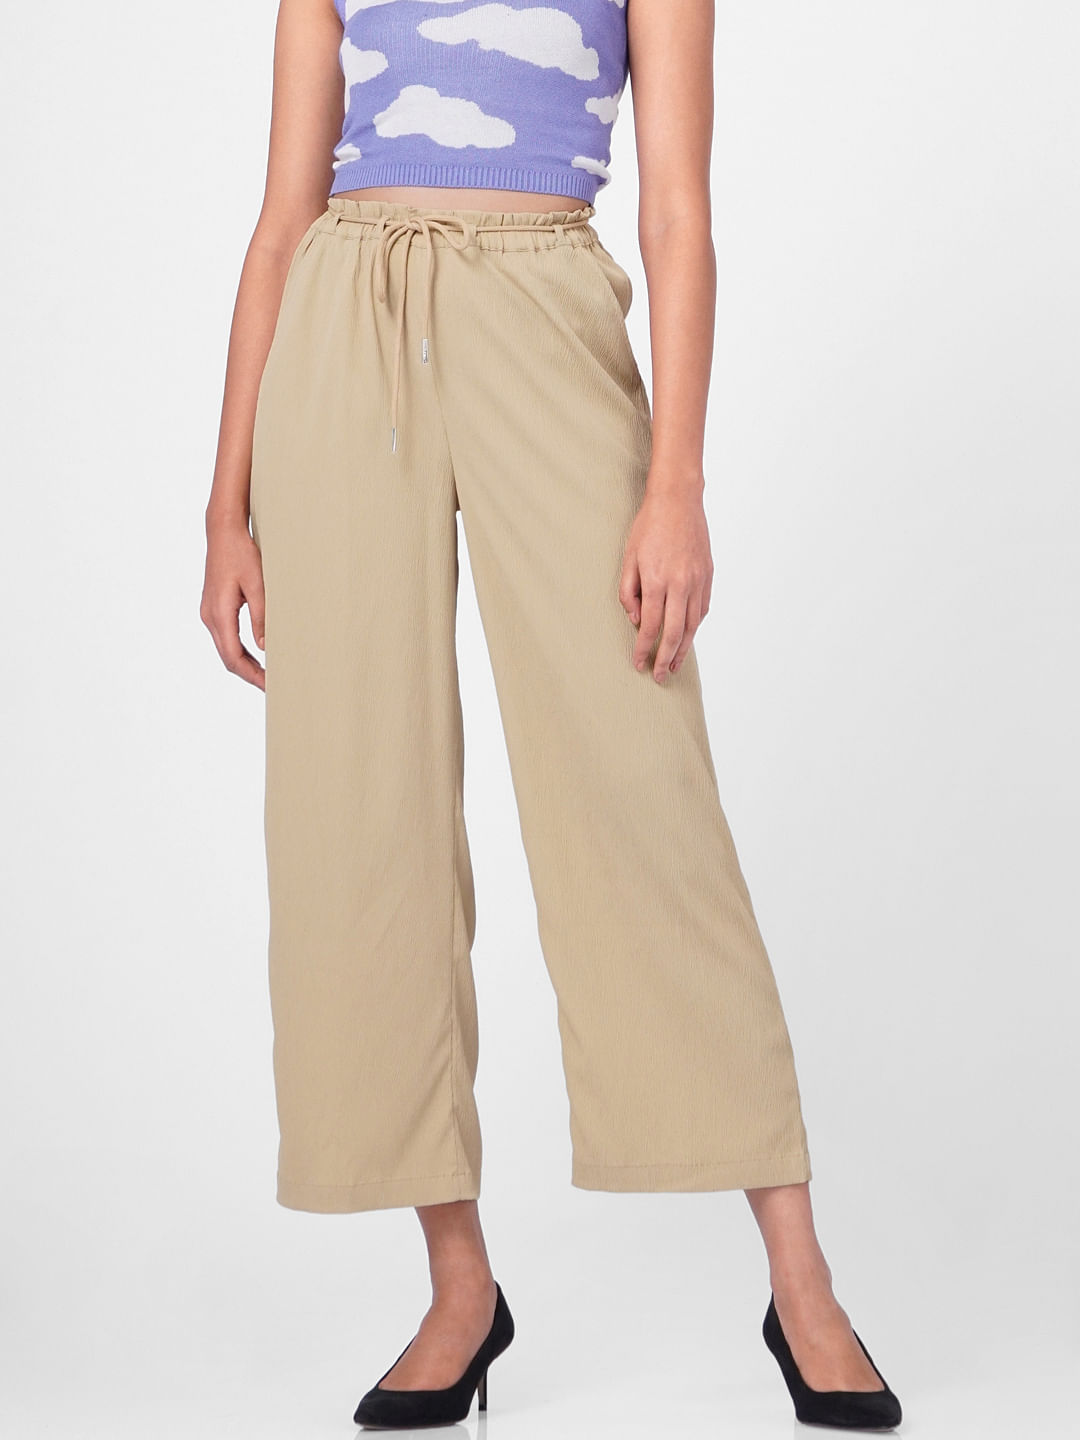 Sateen Stretch Pant | Catherines